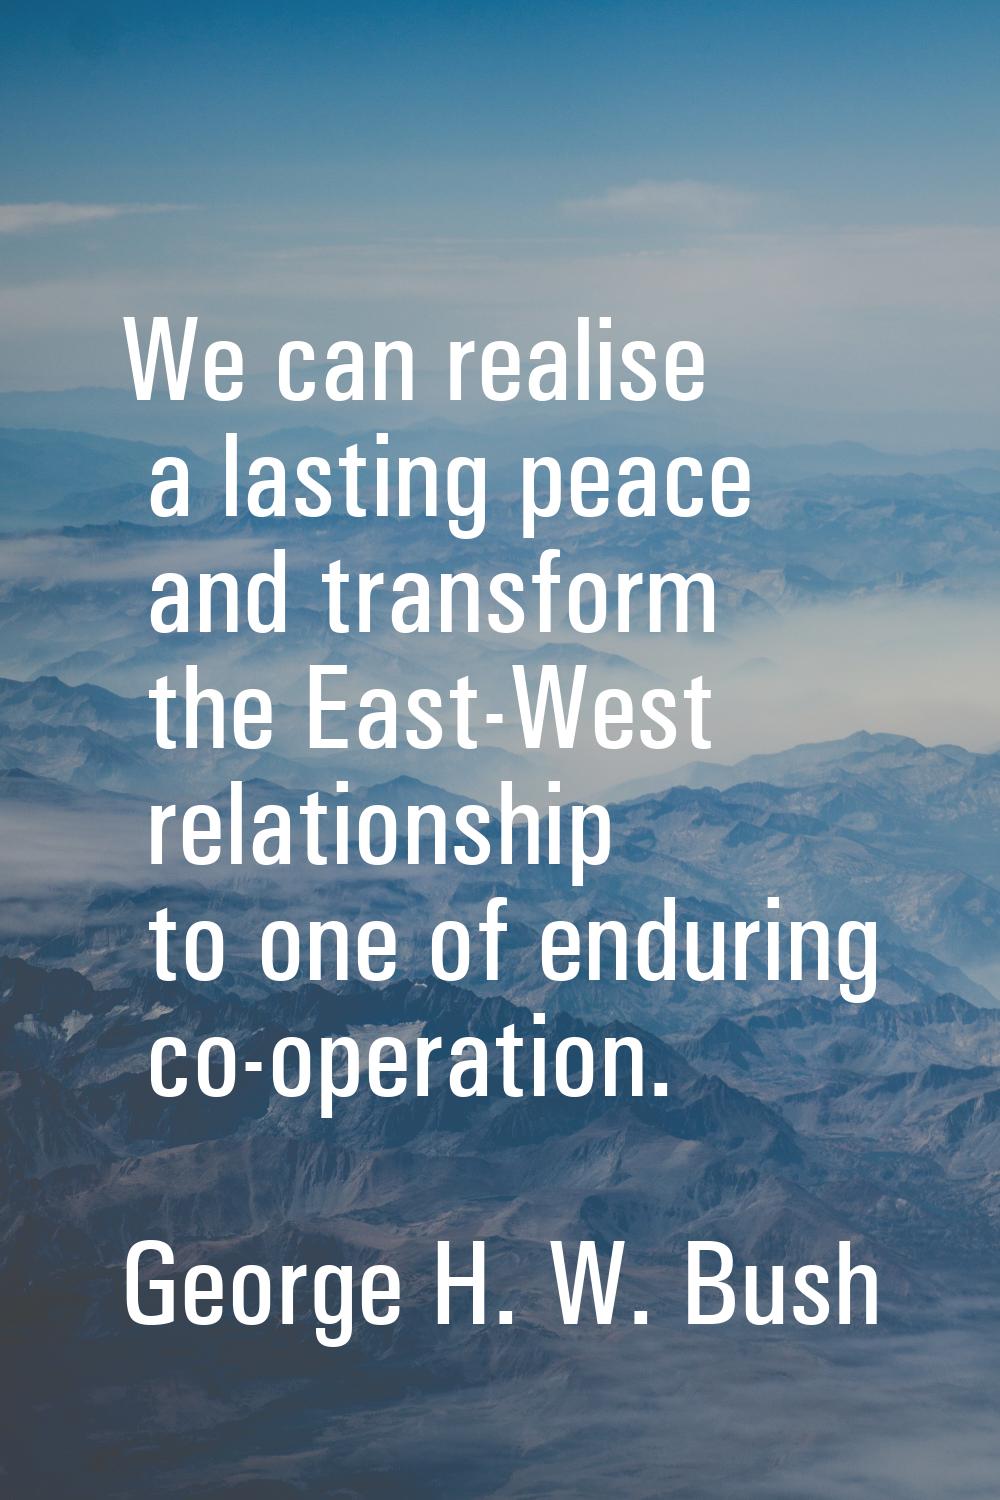 We can realise a lasting peace and transform the East-West relationship to one of enduring co-opera